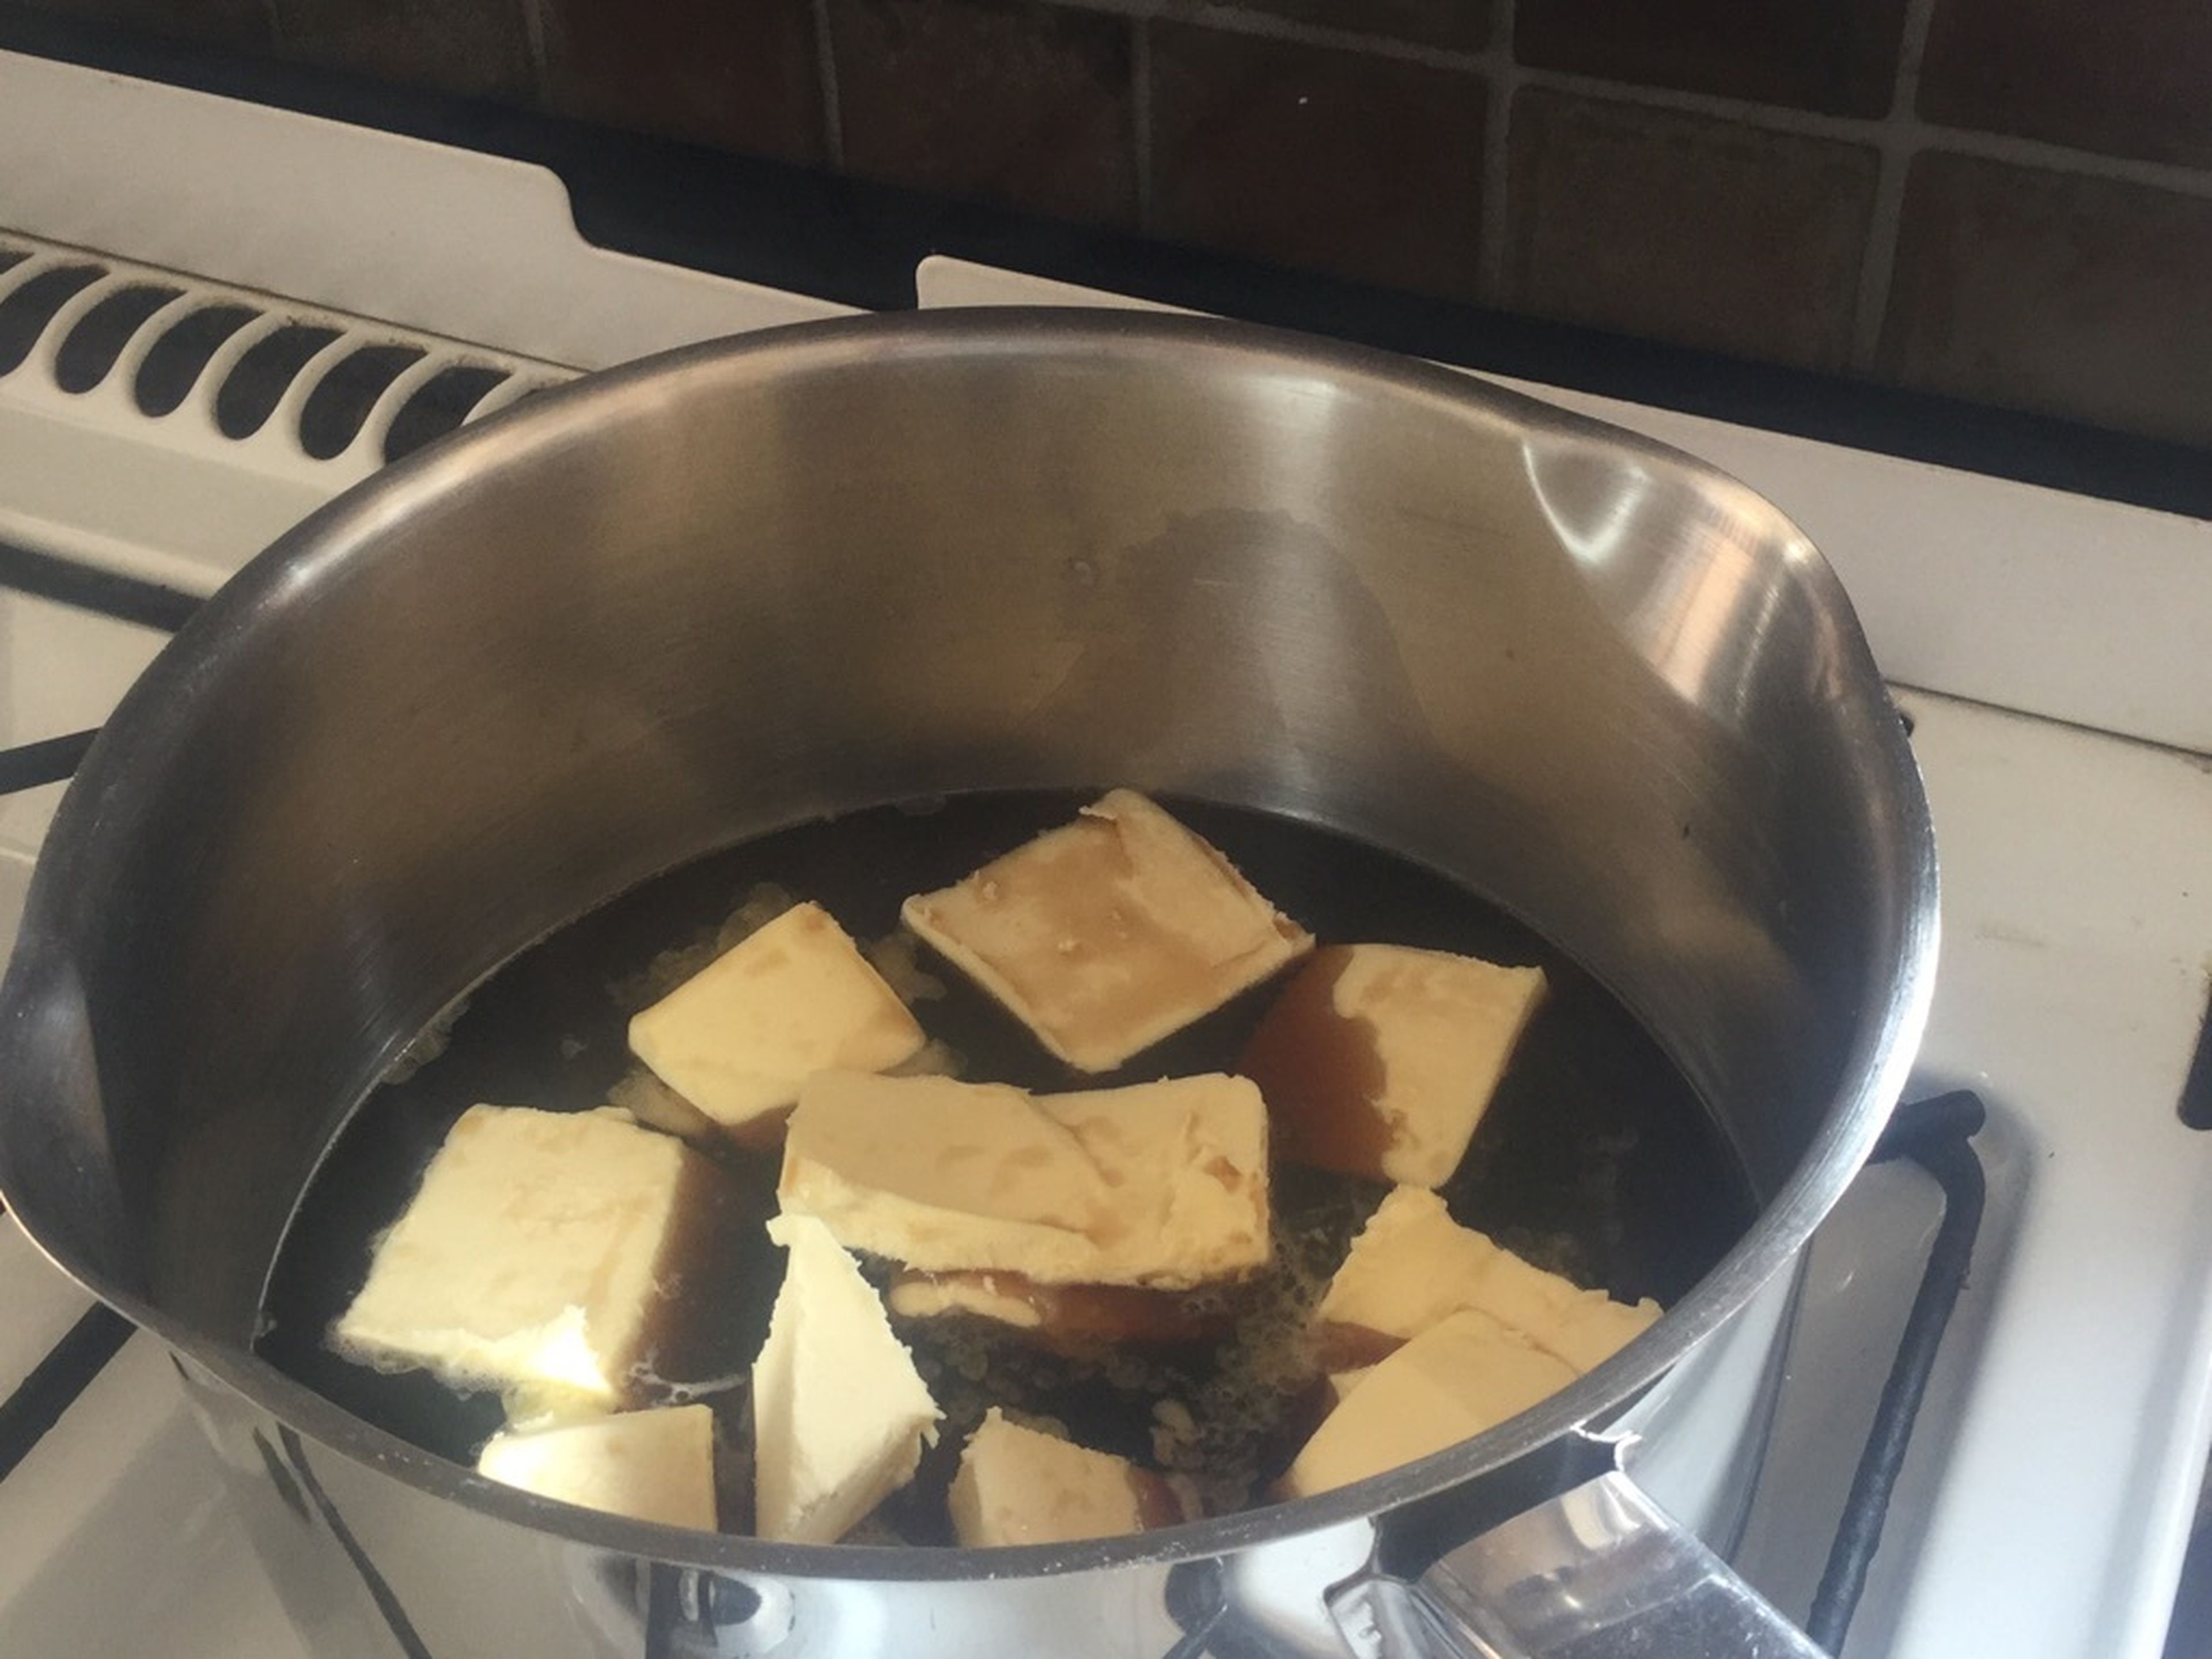 Pre-heat the oven to 160°C/320°F and grease the baking pan. In a saucepan, heat the Guinness and chopped butter until the butter melts.